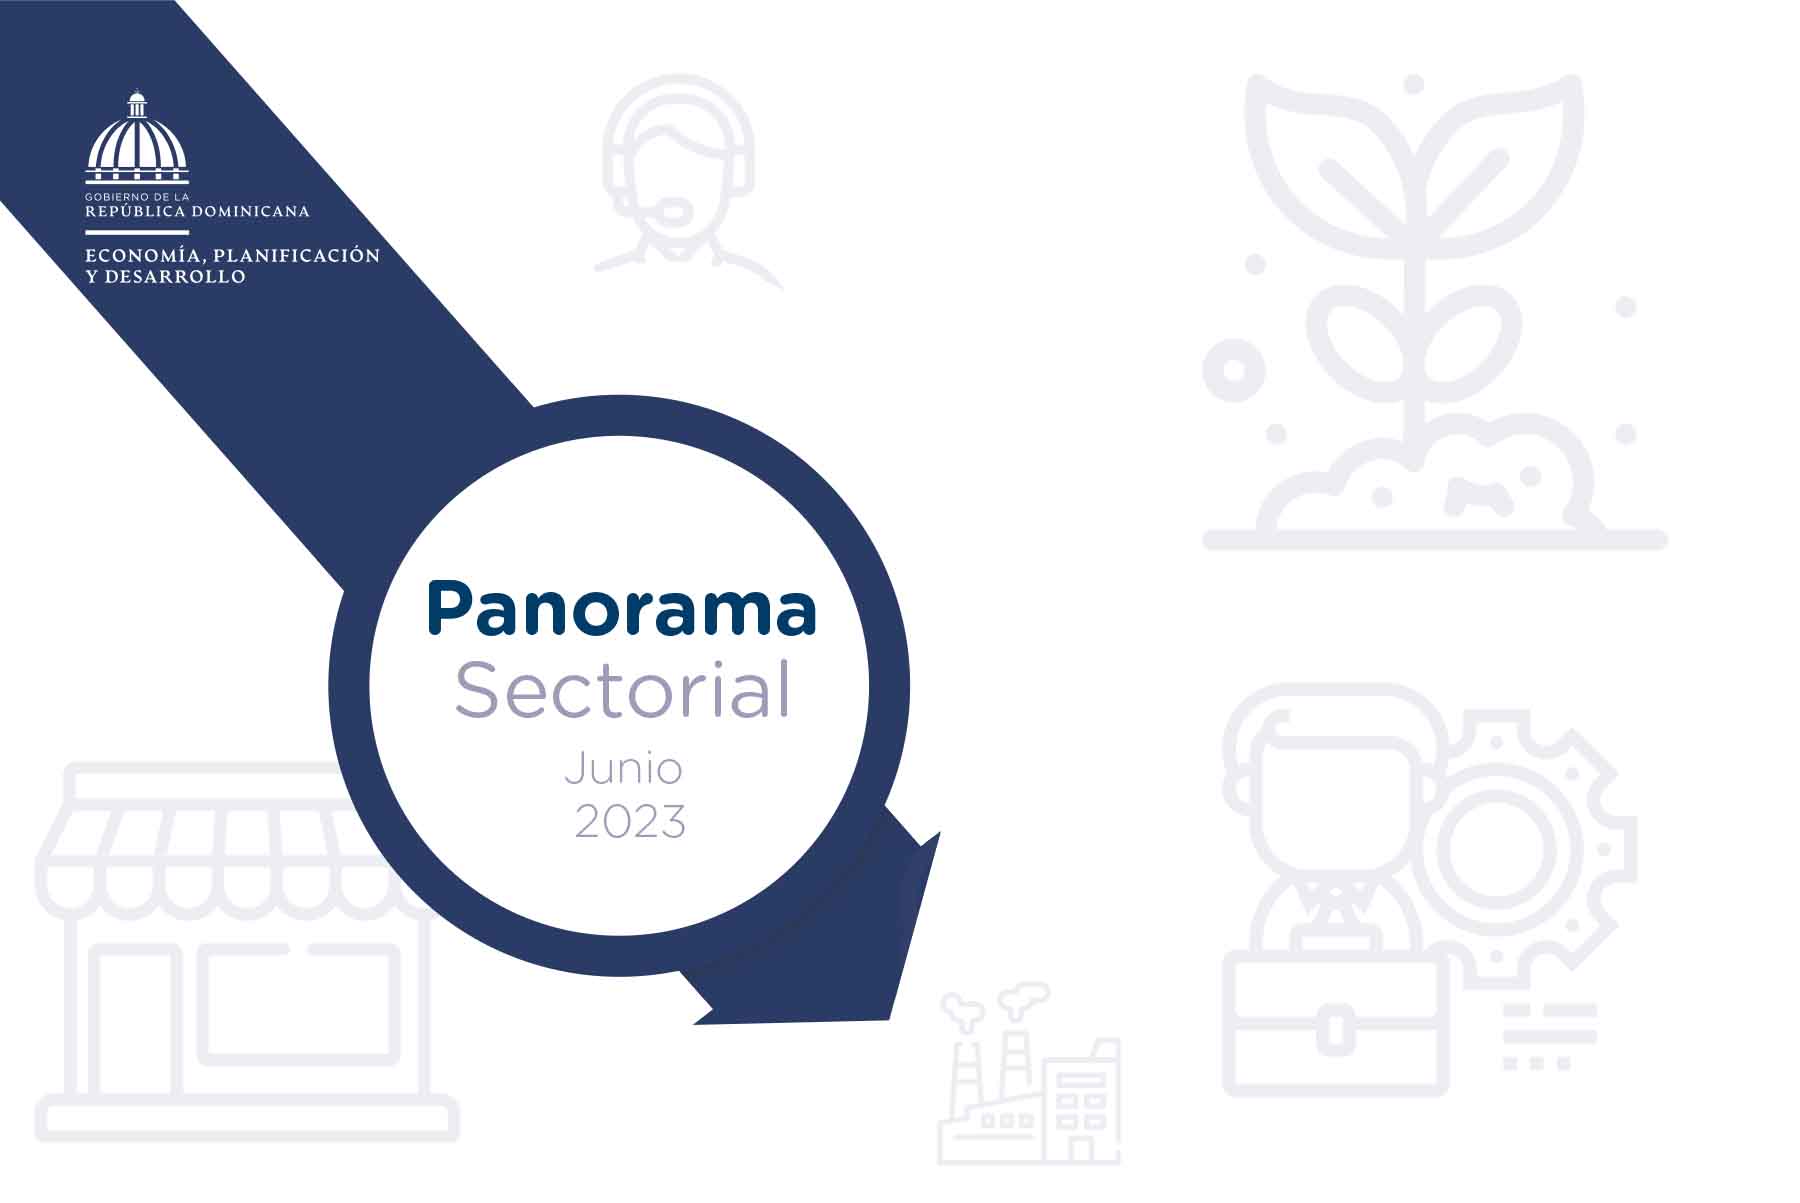 Panorama Sectorial abril 2023